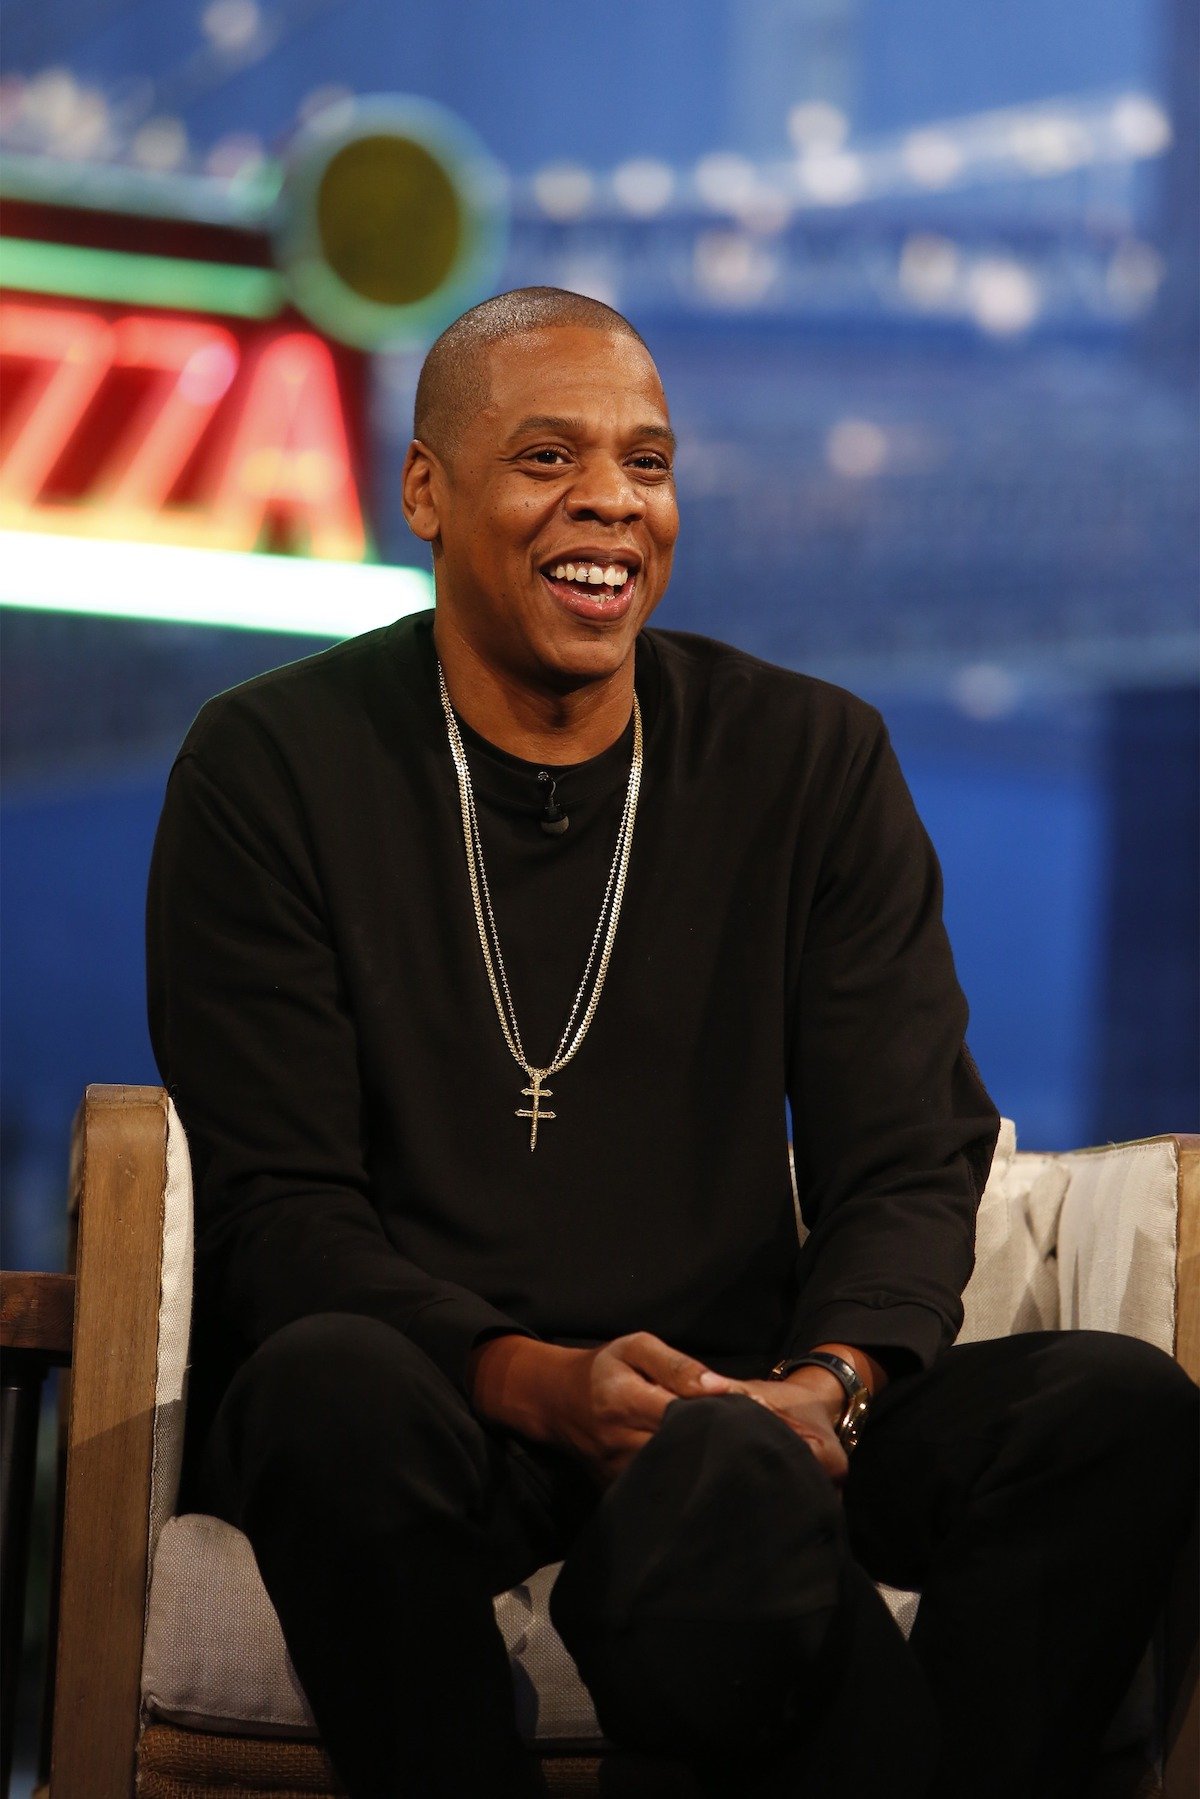 Jay-Z smiles while being interviewed on stage.